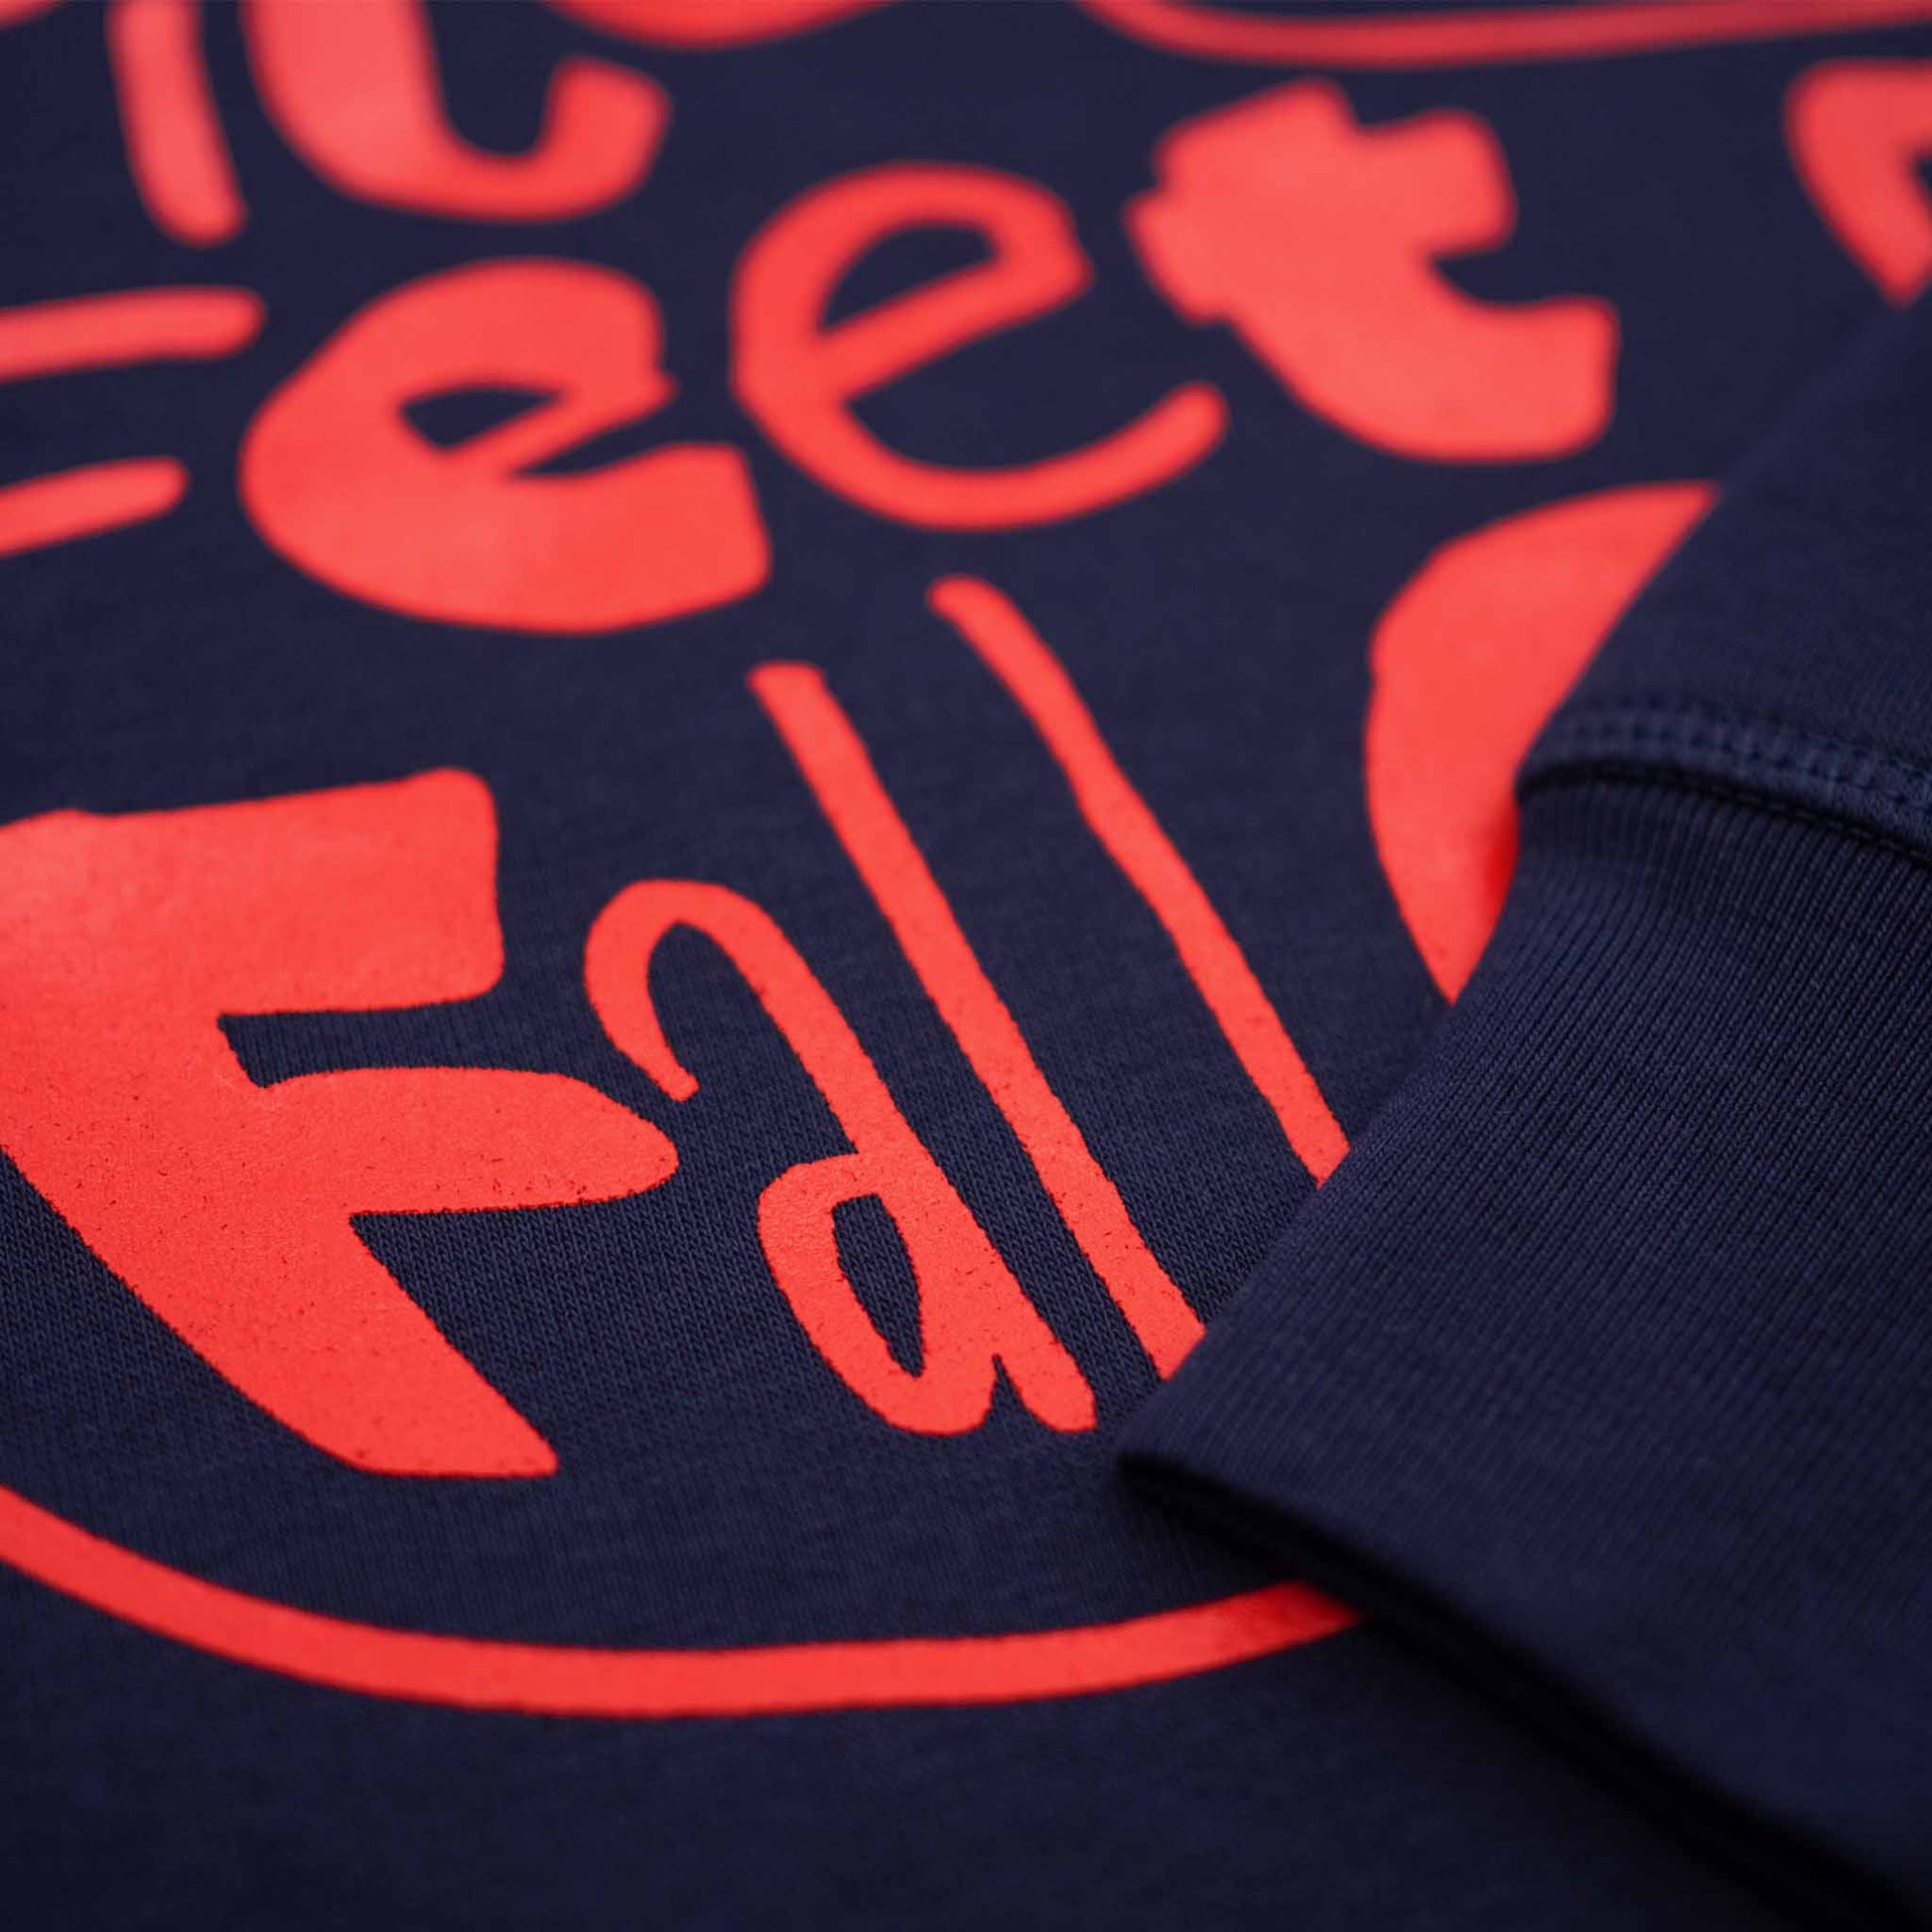 Dance 'til ur feet fall off navy sweatshirt with red graphic type design